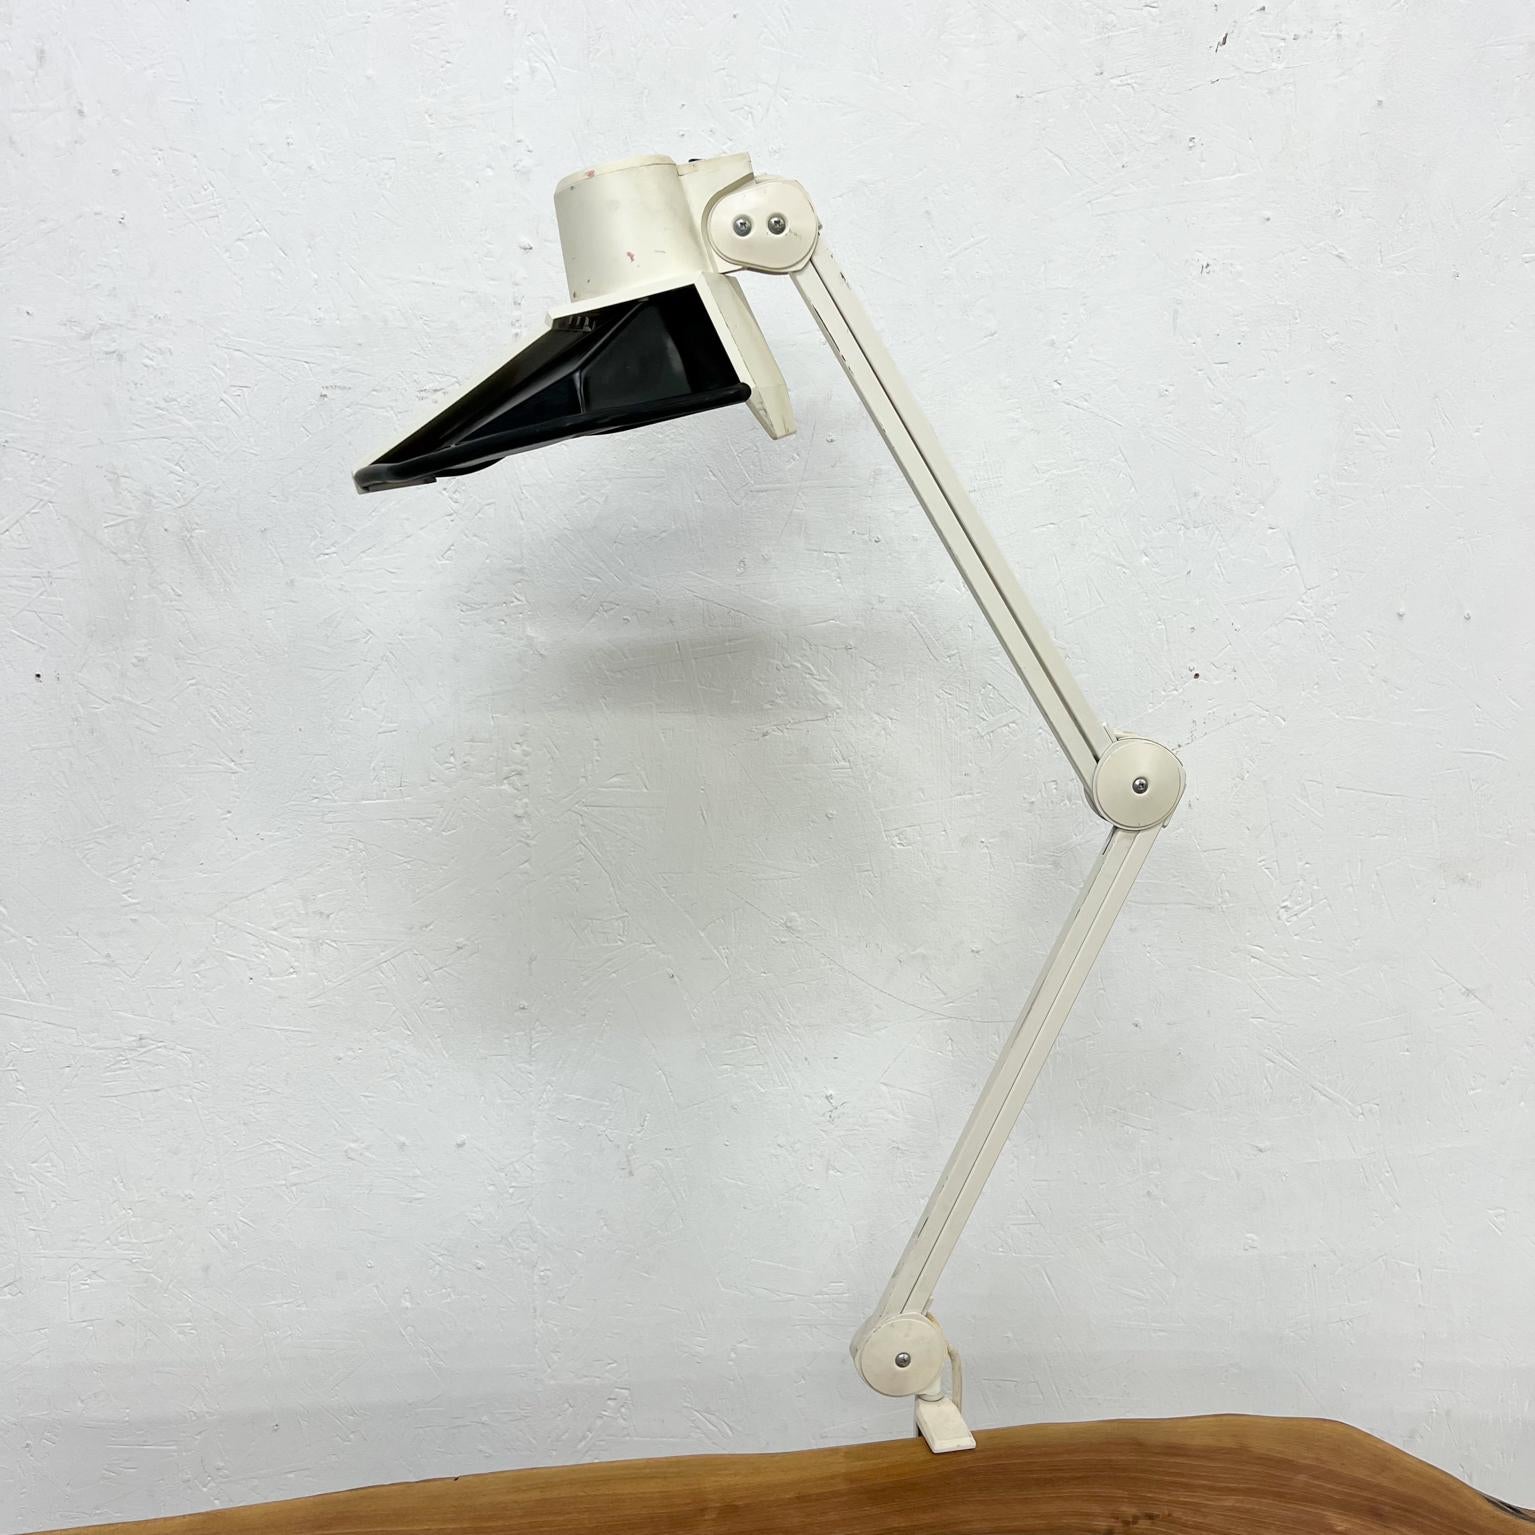 Late 20th Century 1970s LUXO Architect Rare Vintage Task Clamp Lamp for Desk Jac Jacobsen For Sale